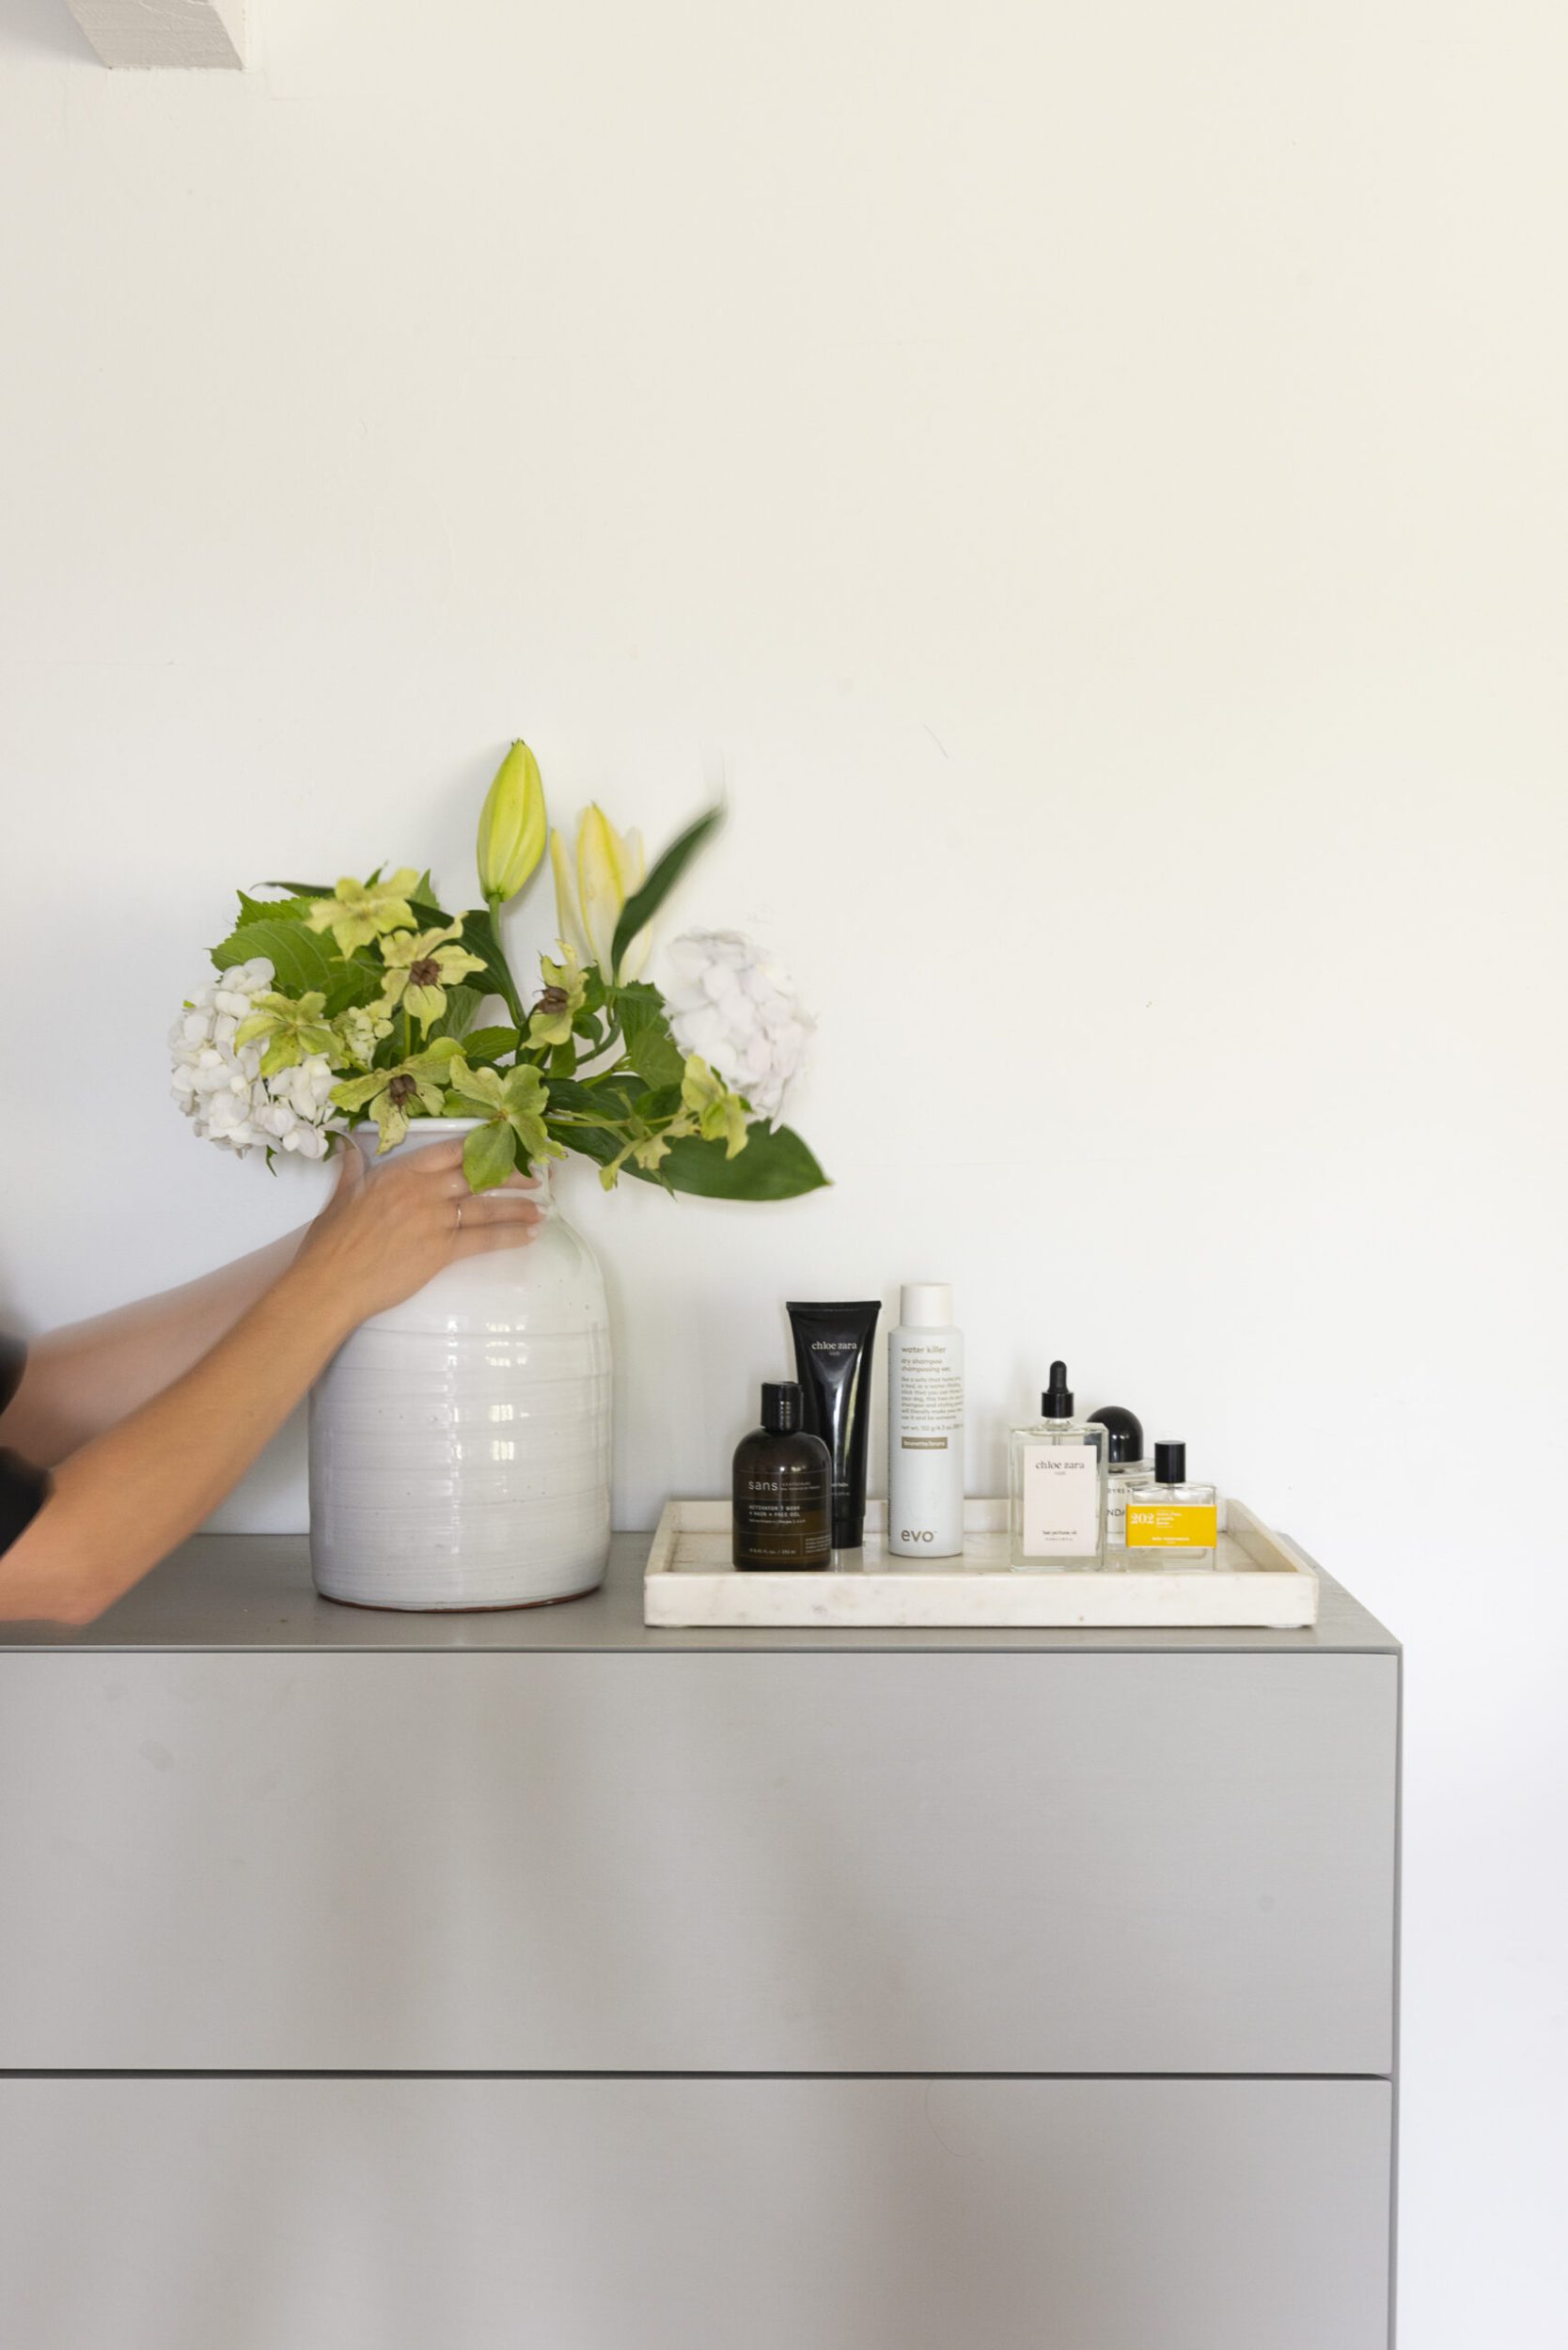 Claudia Zinzan arranging flowers in vase with perfumes beside it